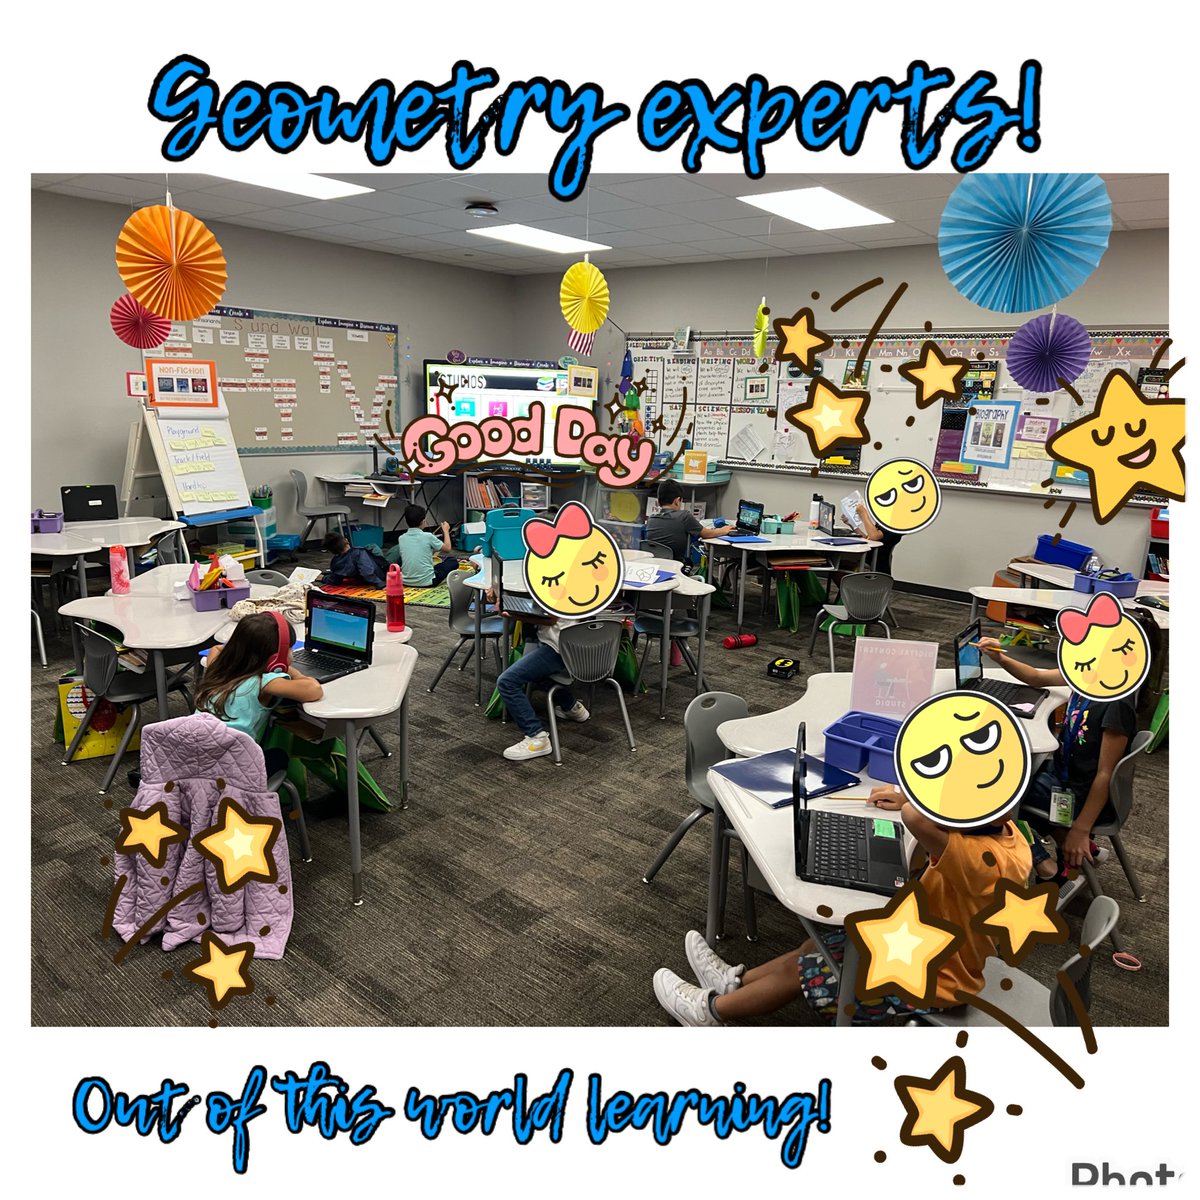 We have had a fun 4 weeks of school! Great visits with our counselors and librarian. We celebrated our personal narratives and shared our learning in studios. @CFISDAndre @CyFairISD @CFISD_ELAR2_5 @CFISDELs #LeopardsLEAD #CFISDSpirit #2ndtoNone